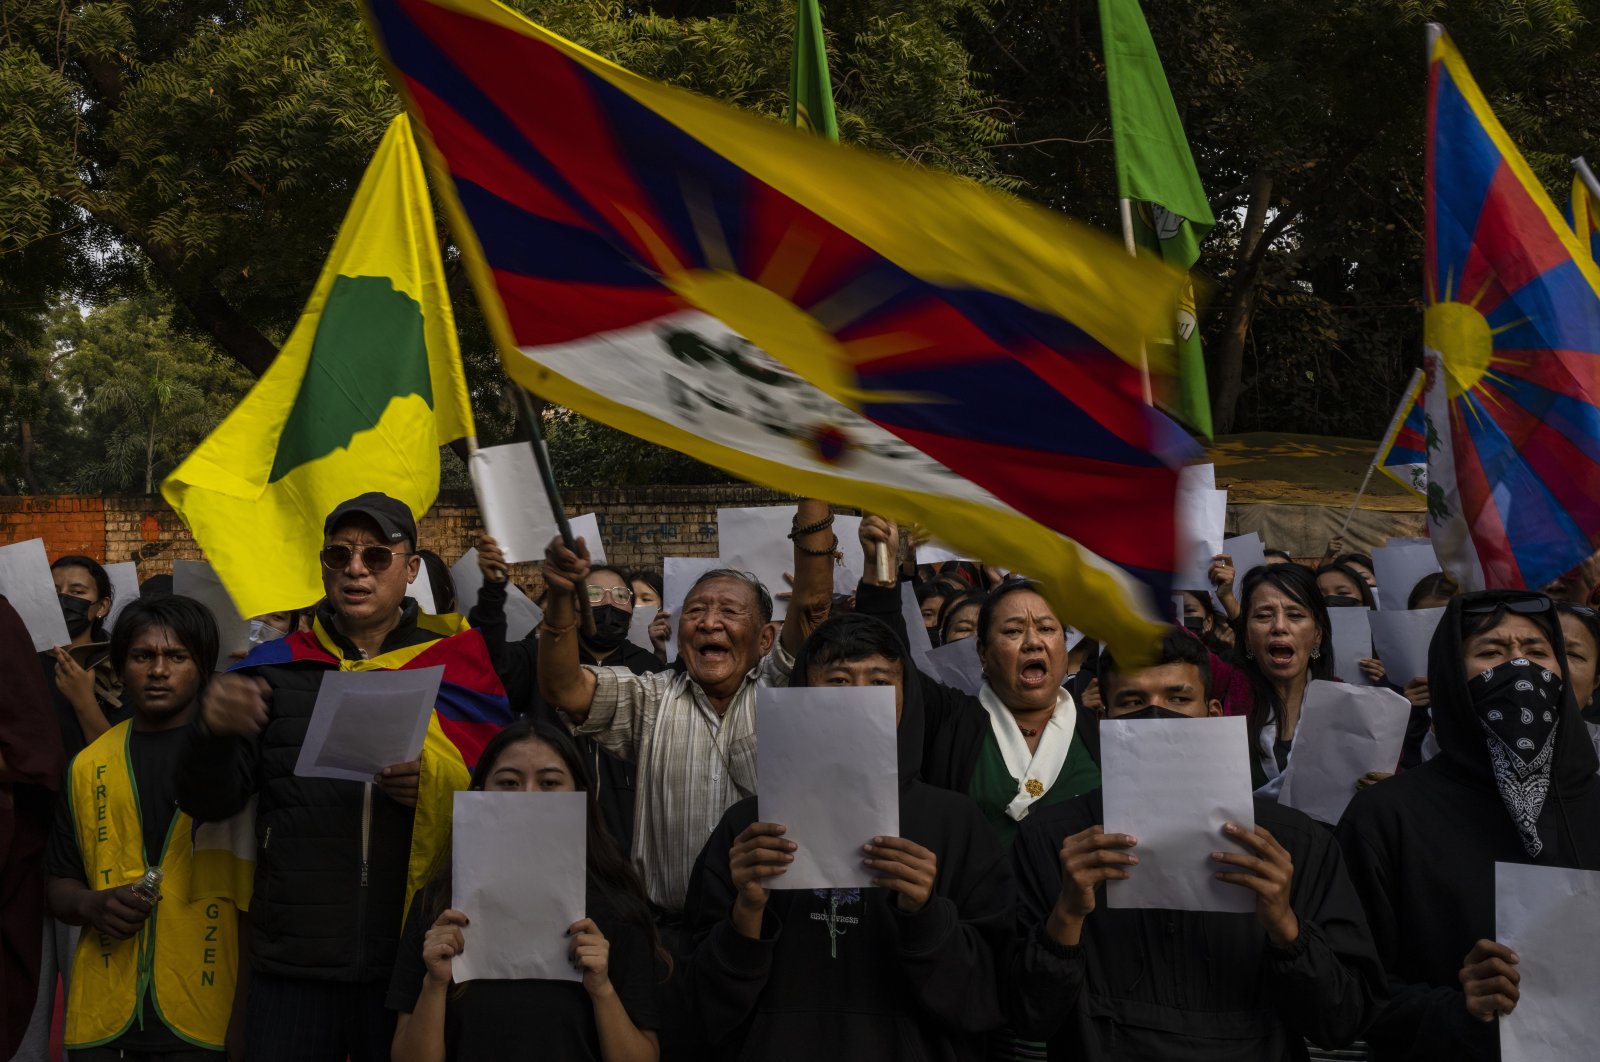 Exile Tibetan activists hold blank white papers symbolizing government censorship in China, while shouting anti-China slogans during a protest in New Delhi, India, Dec. 2, 2022. (AP Photo)